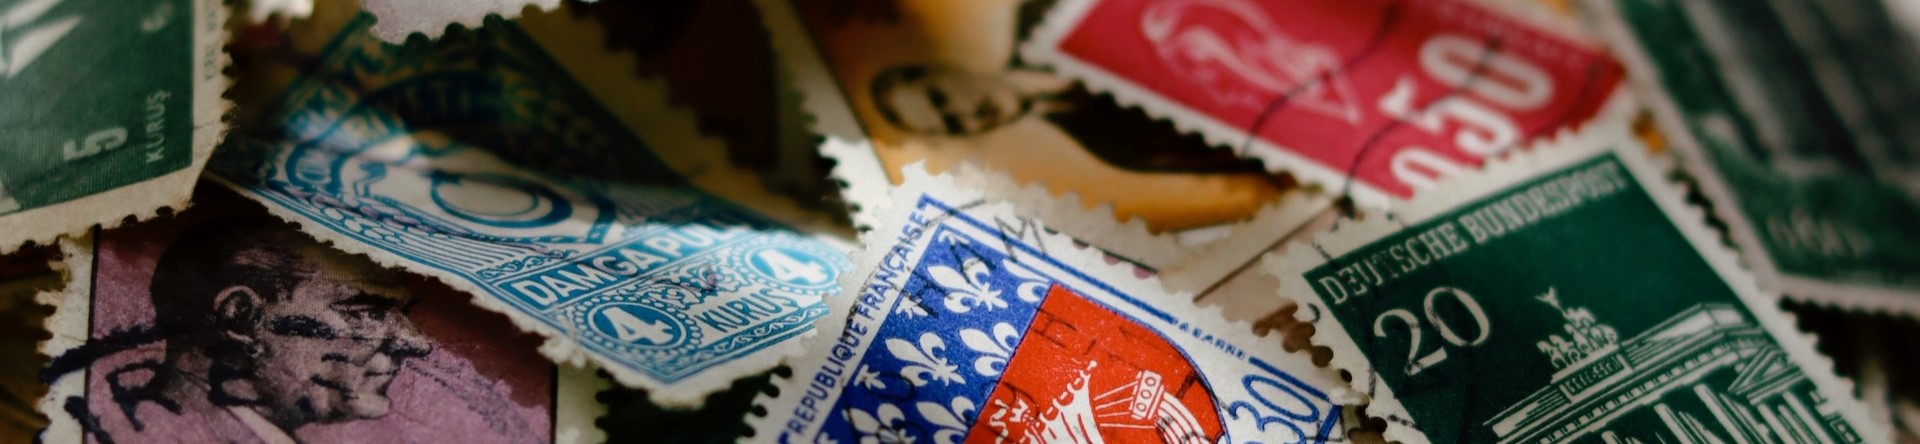 Sell Stamps, Postcards & Philately Items